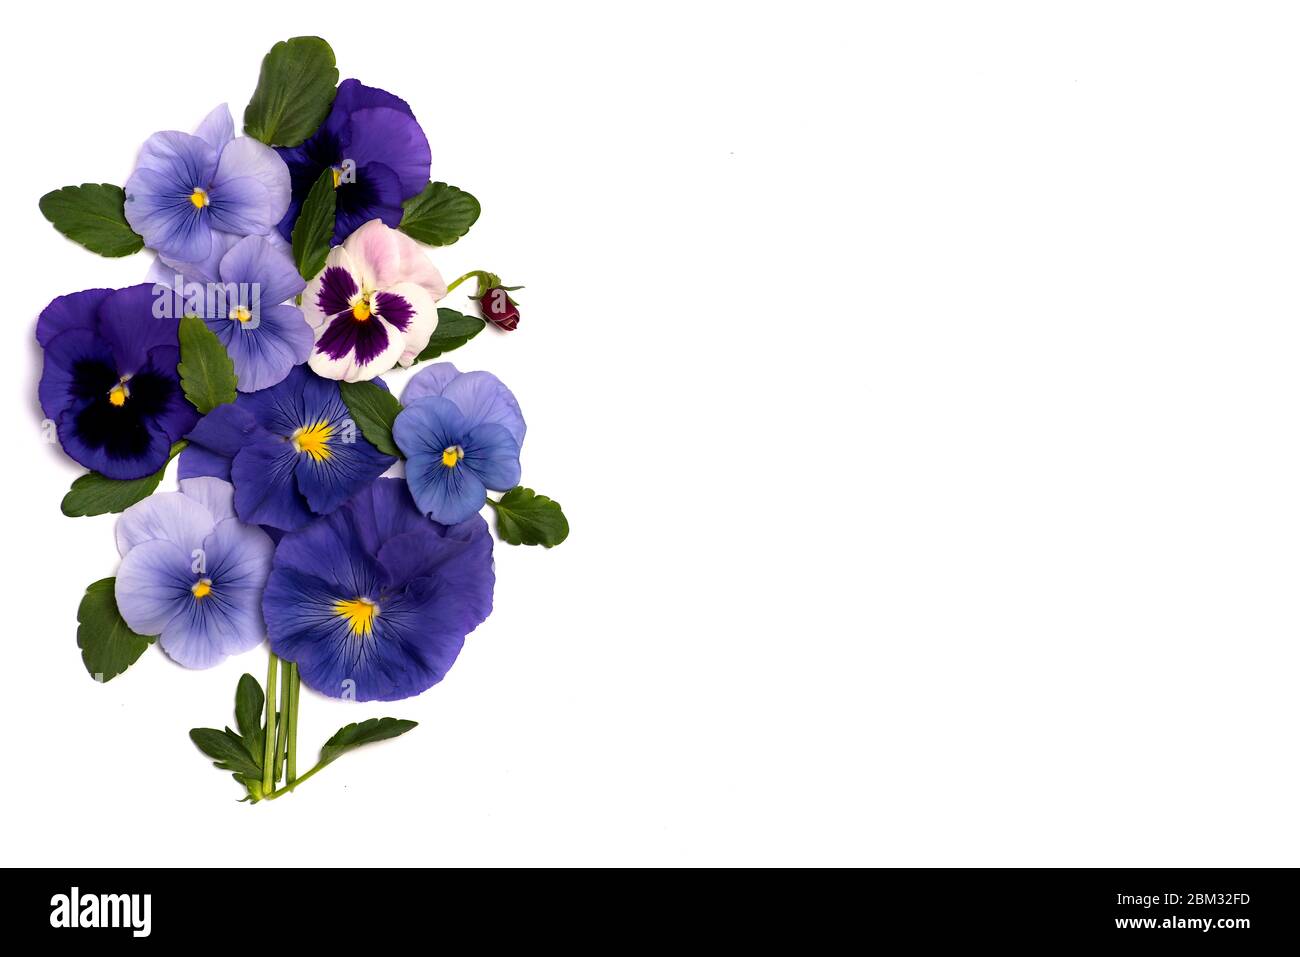 Viola plant violet flower in blossom arrangement isolated with copy space Stock Photo